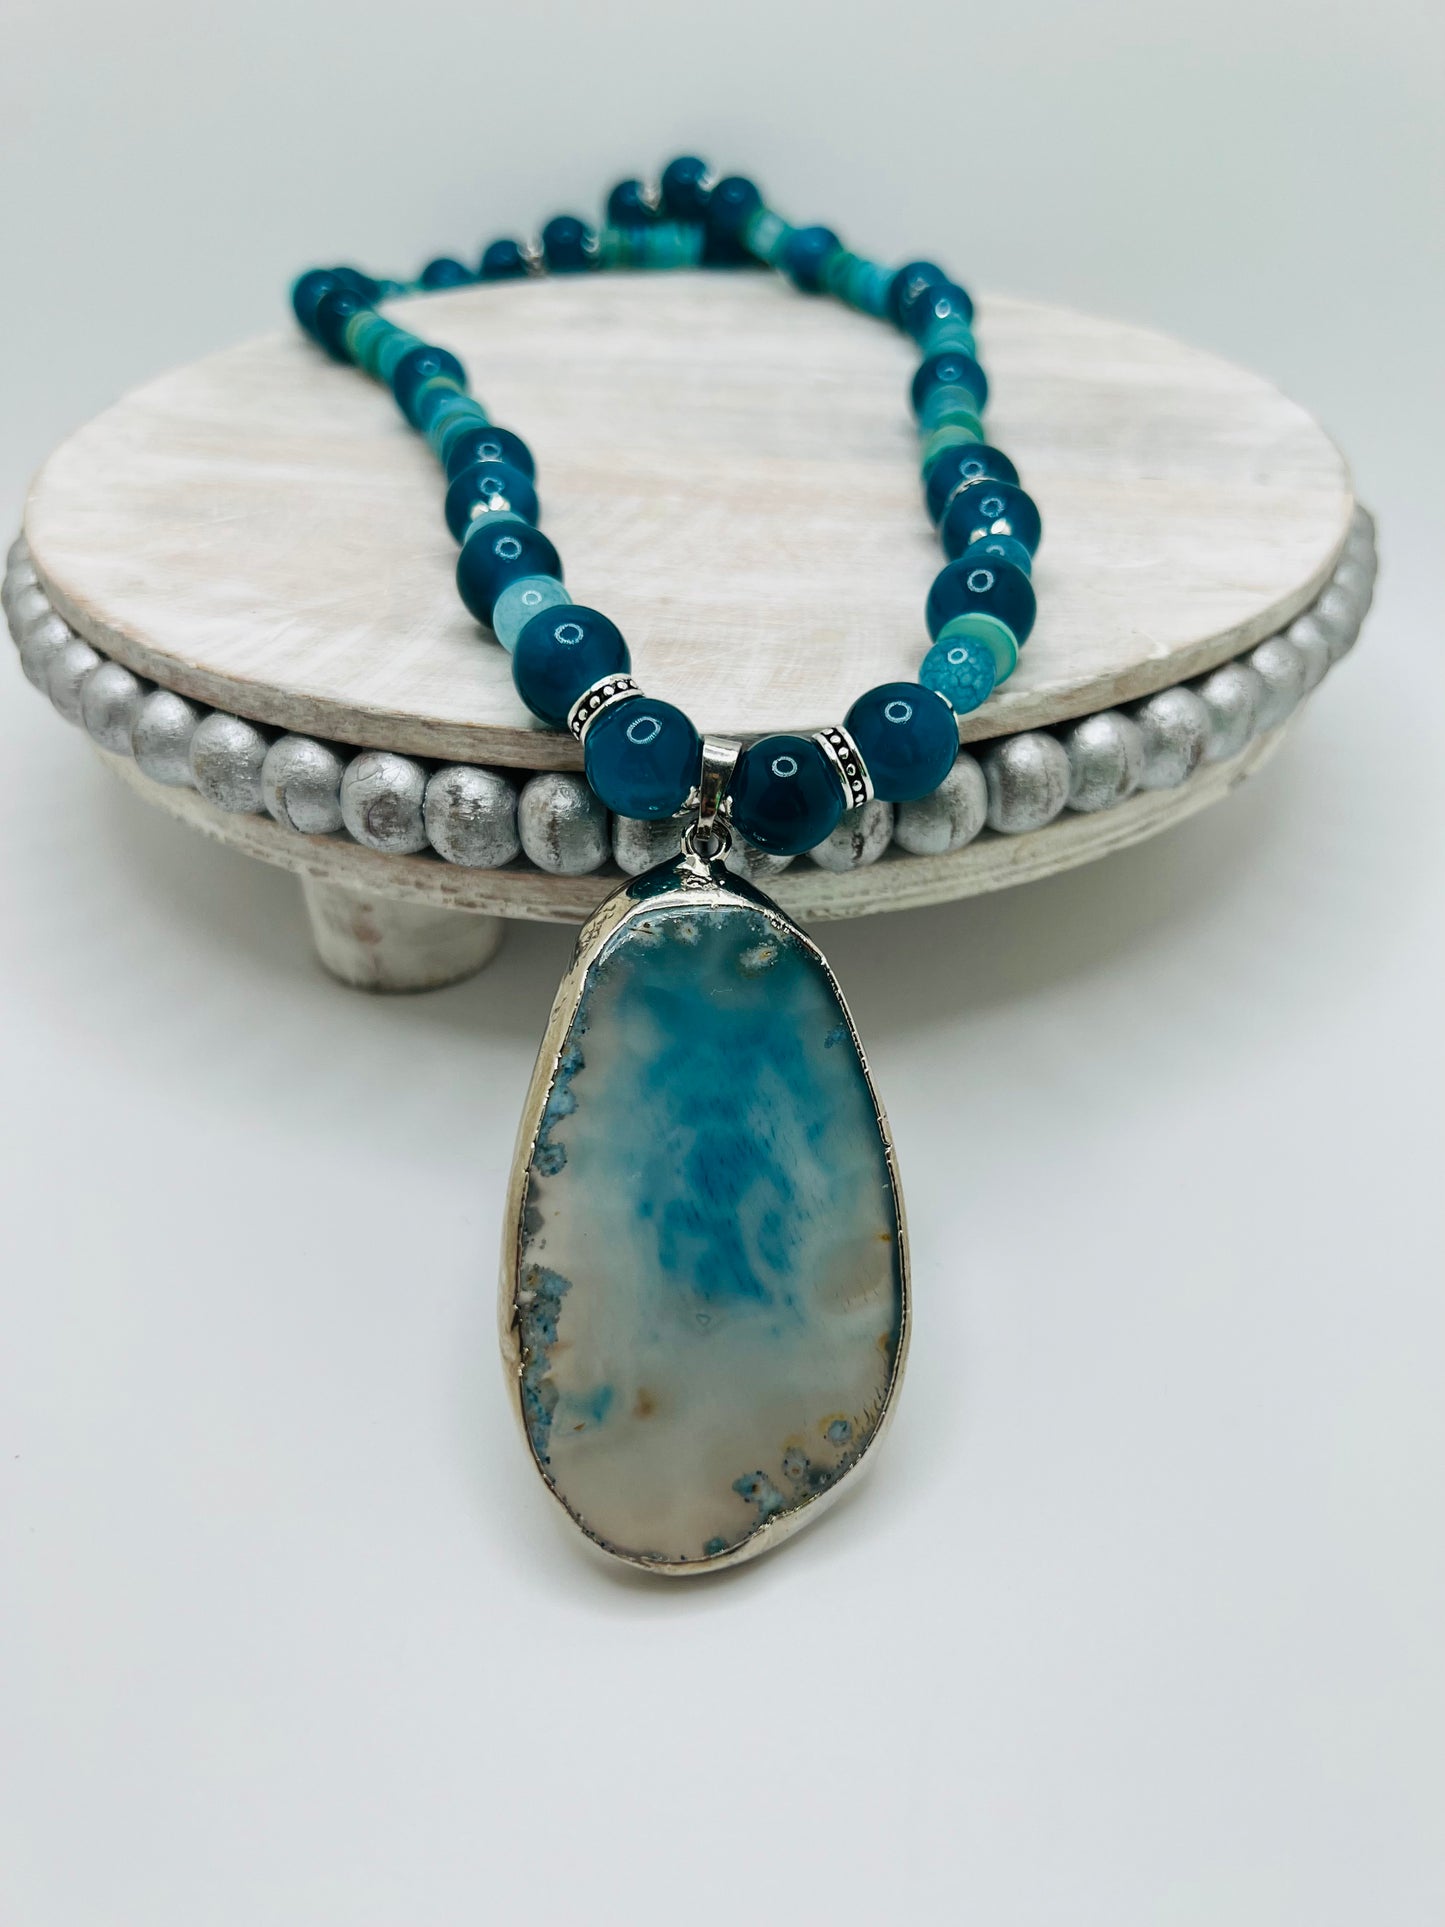 Natural Turquoise/Teal Gemstone Necklace with Agate Pendant